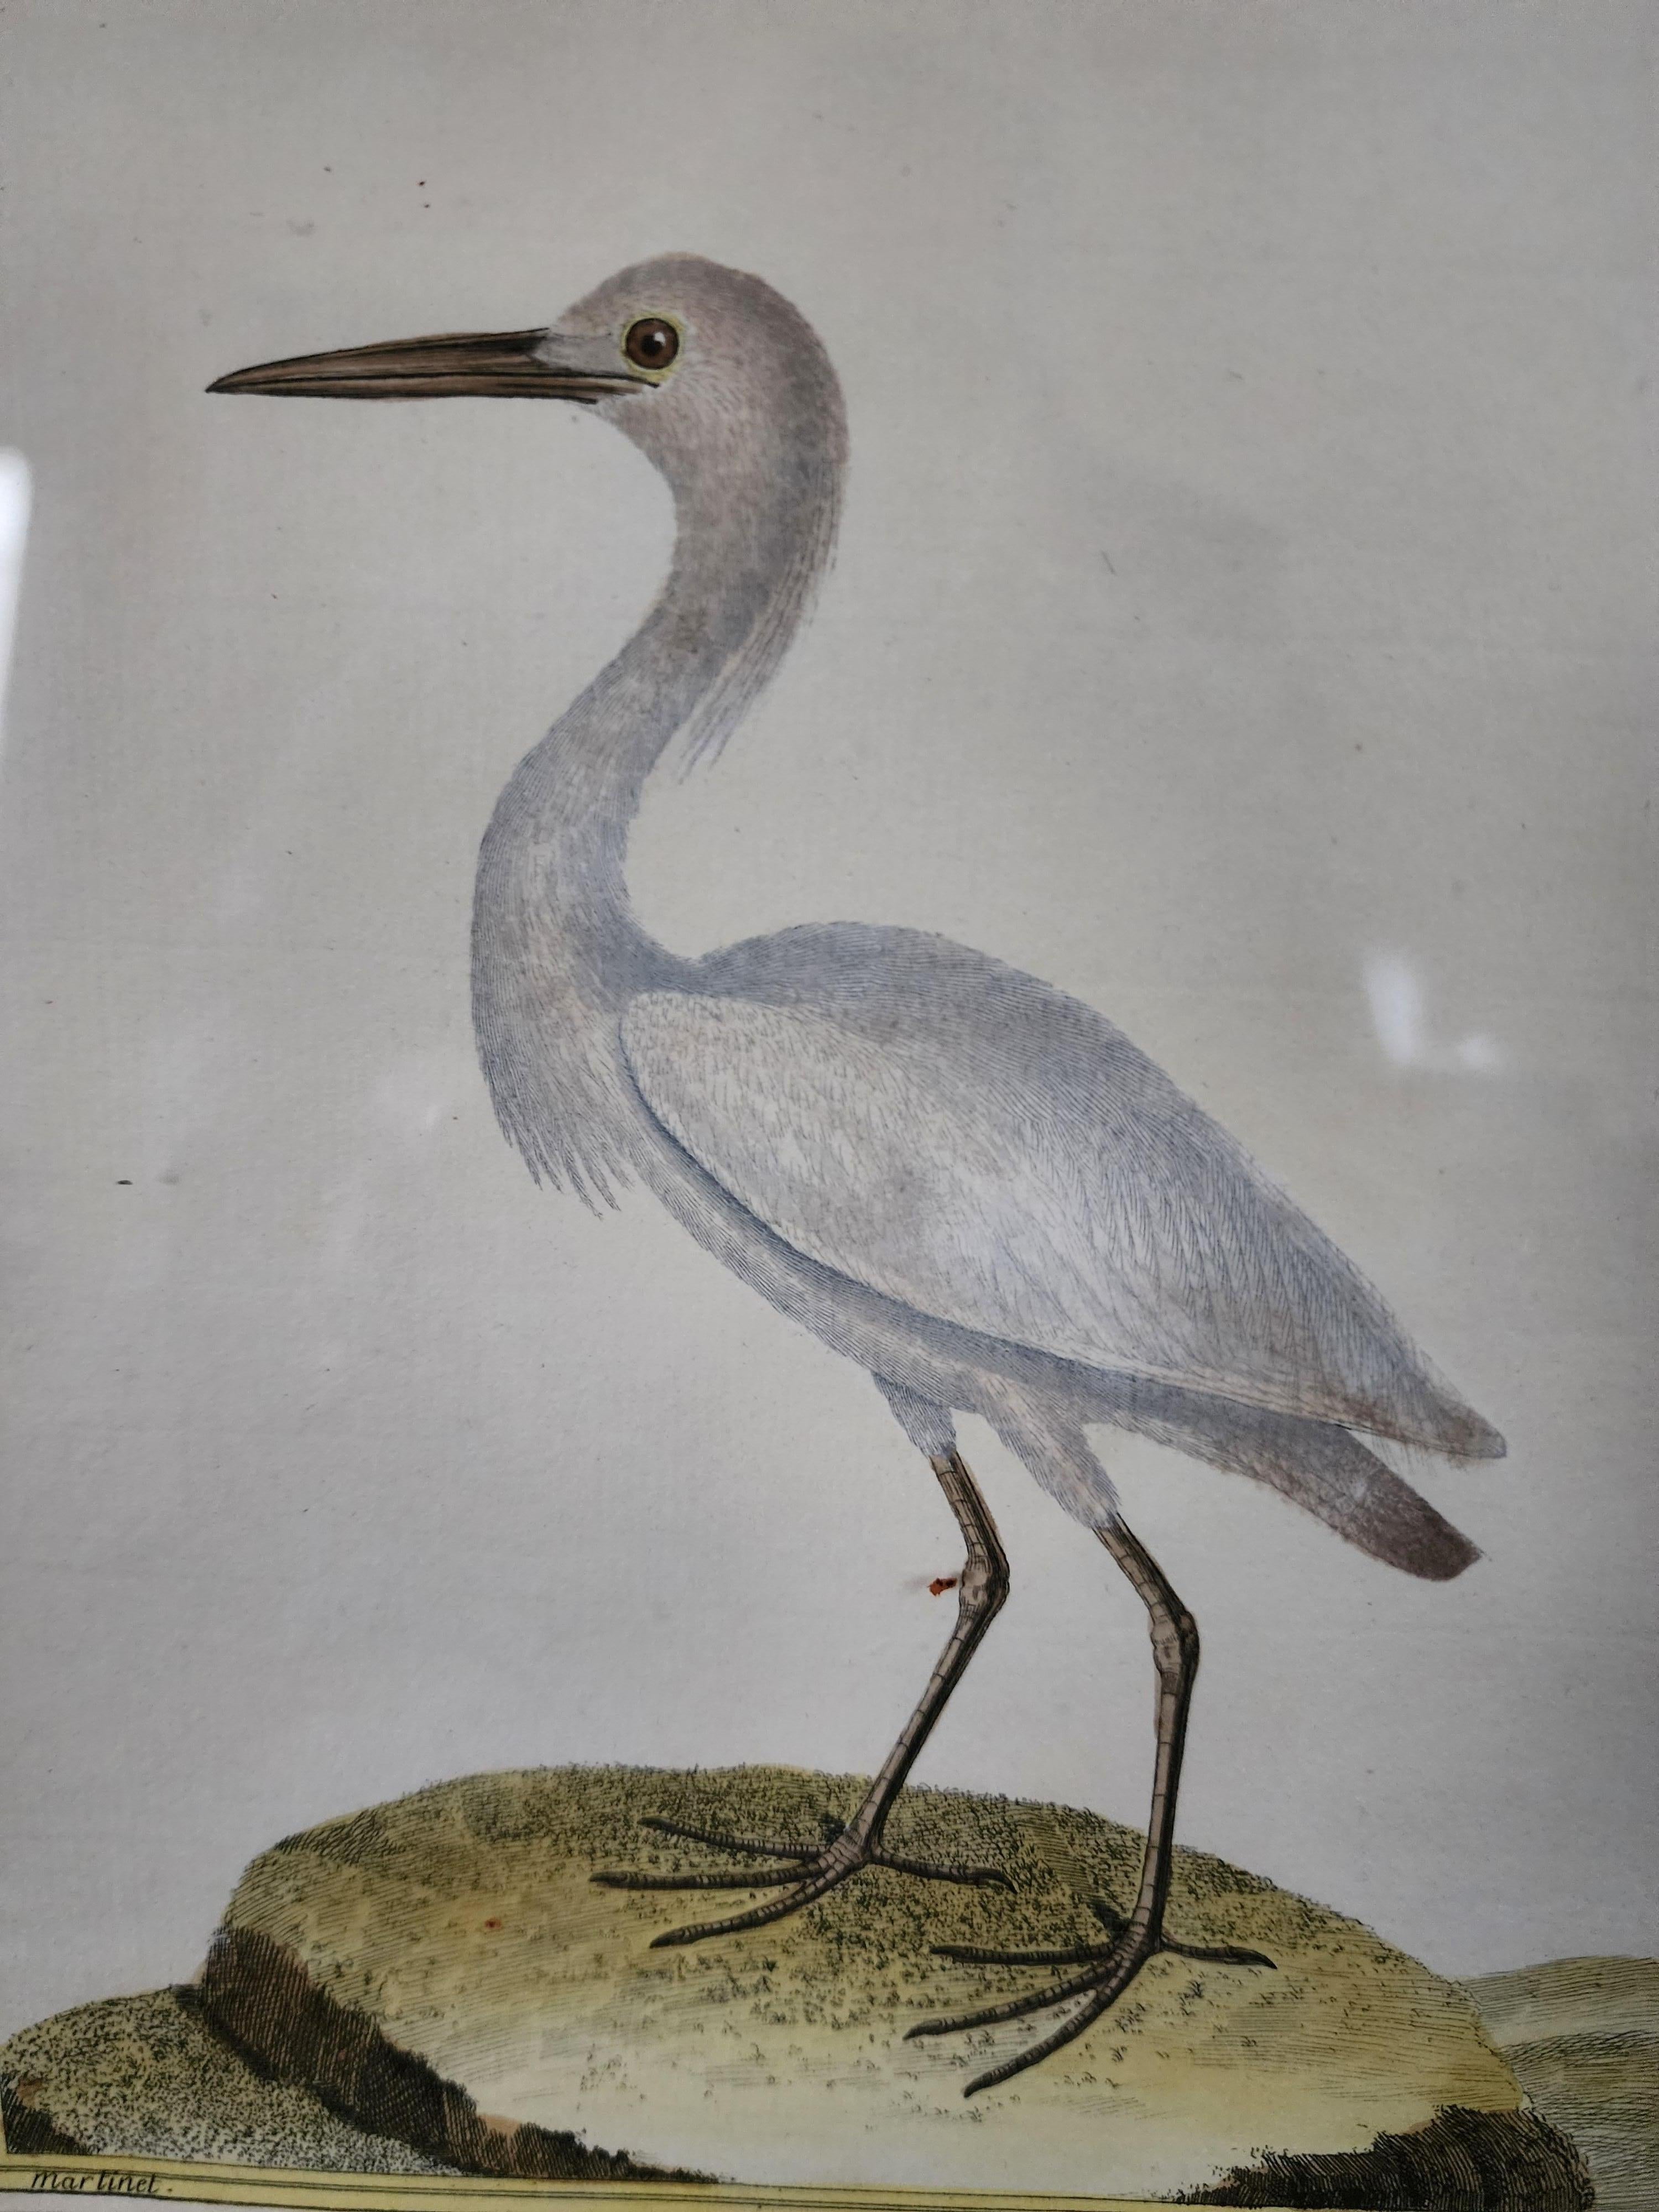 Hand colored Martinet shore bird engraving on laid paper.
Wonderful condition with frame.
Framed dimensions 14 25 x 12.5 in.